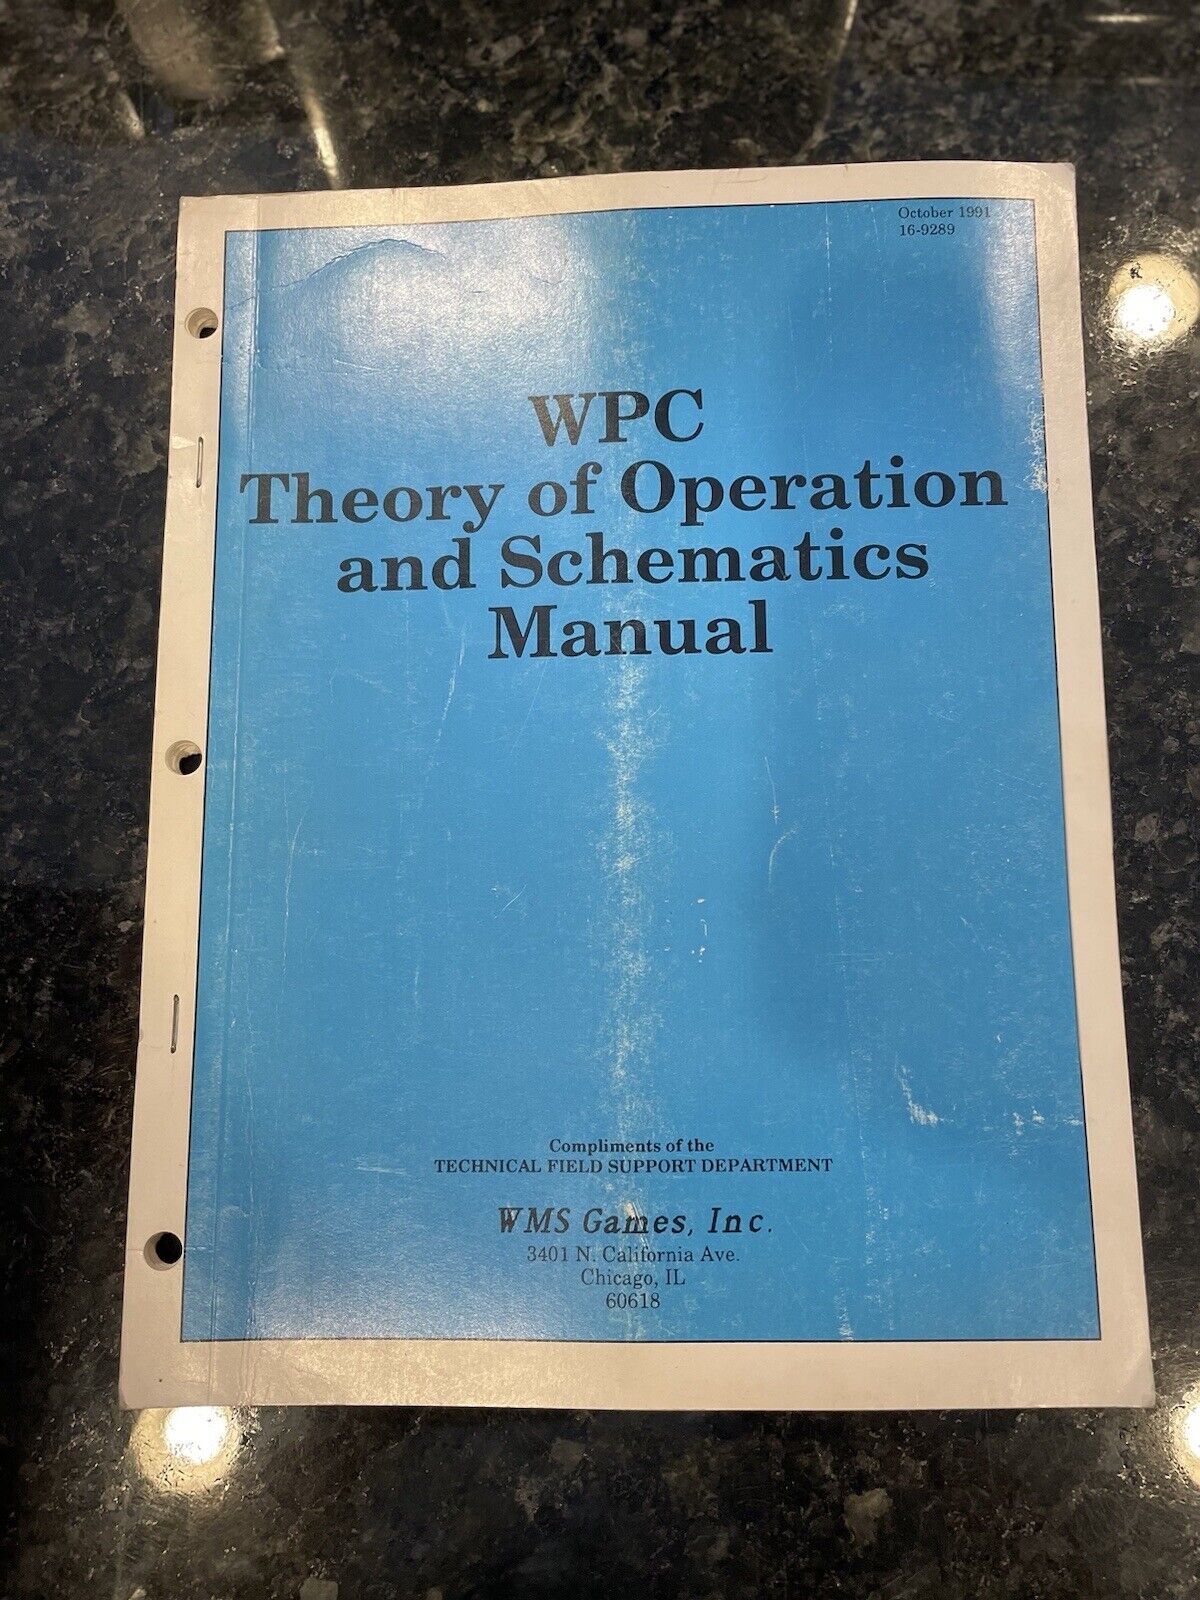 1991 Williams Theory of Operation and Schematics Manual